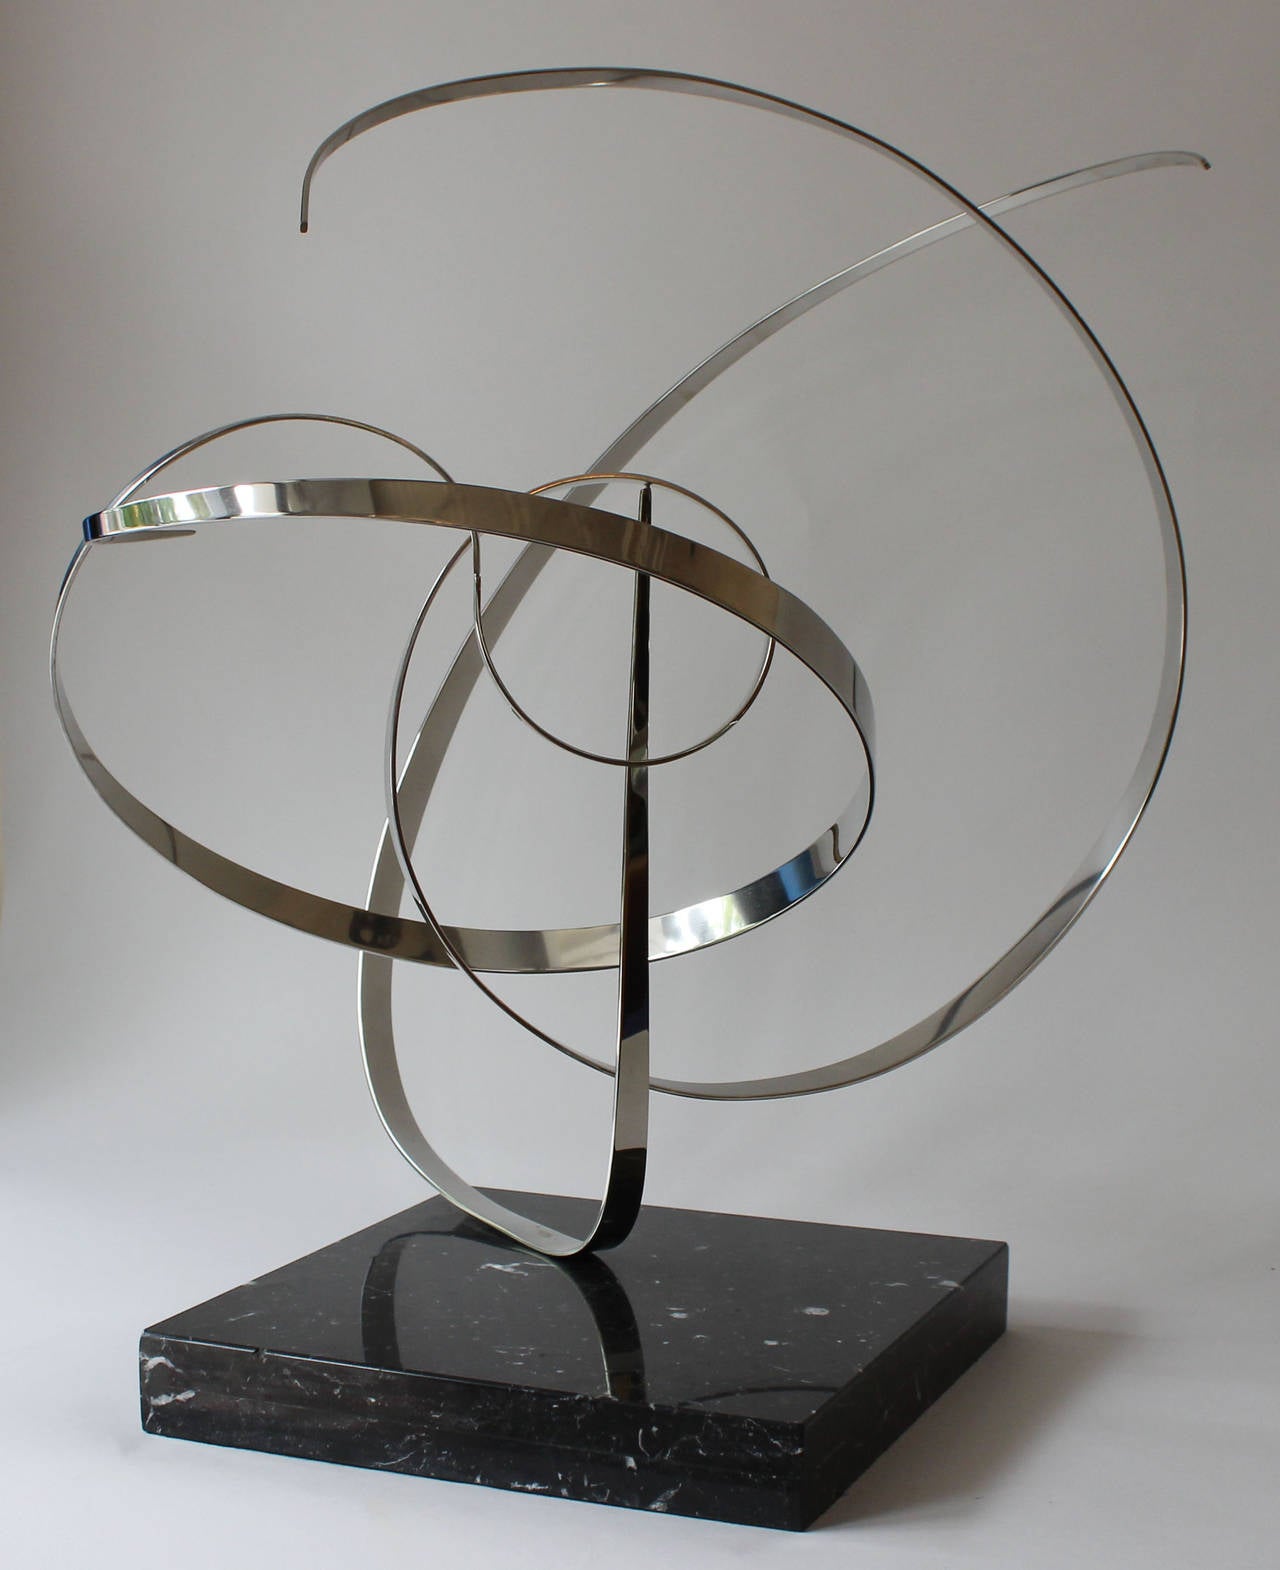 A large, kinetic sculpture on marble base, comprised of three pivot point connecting stainless steel ribbons. Rotates and adjusts with wind or light touch. By self-taught California electronic technician cum artist Michael Cutler (b1947), who began